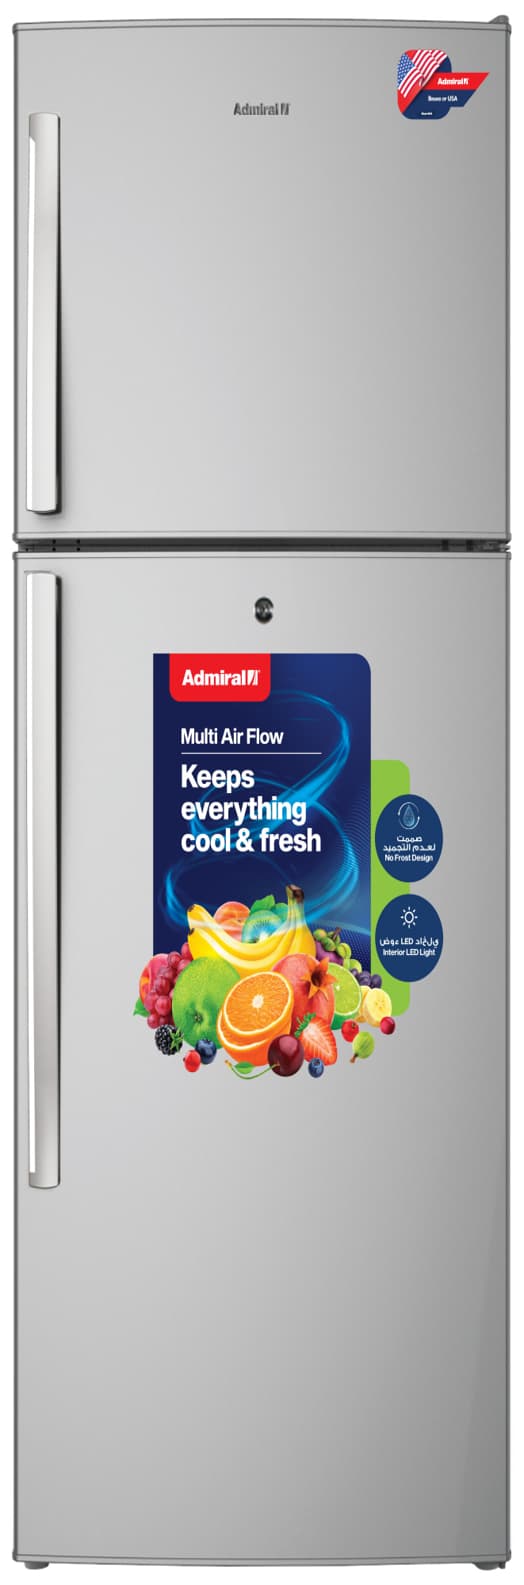 Admiral Top Mount Refrigerator 251 LTR: Inverter, Multi Air Flow, No Frost, Eco-Friendly, LED - Silver - Modern Electronics